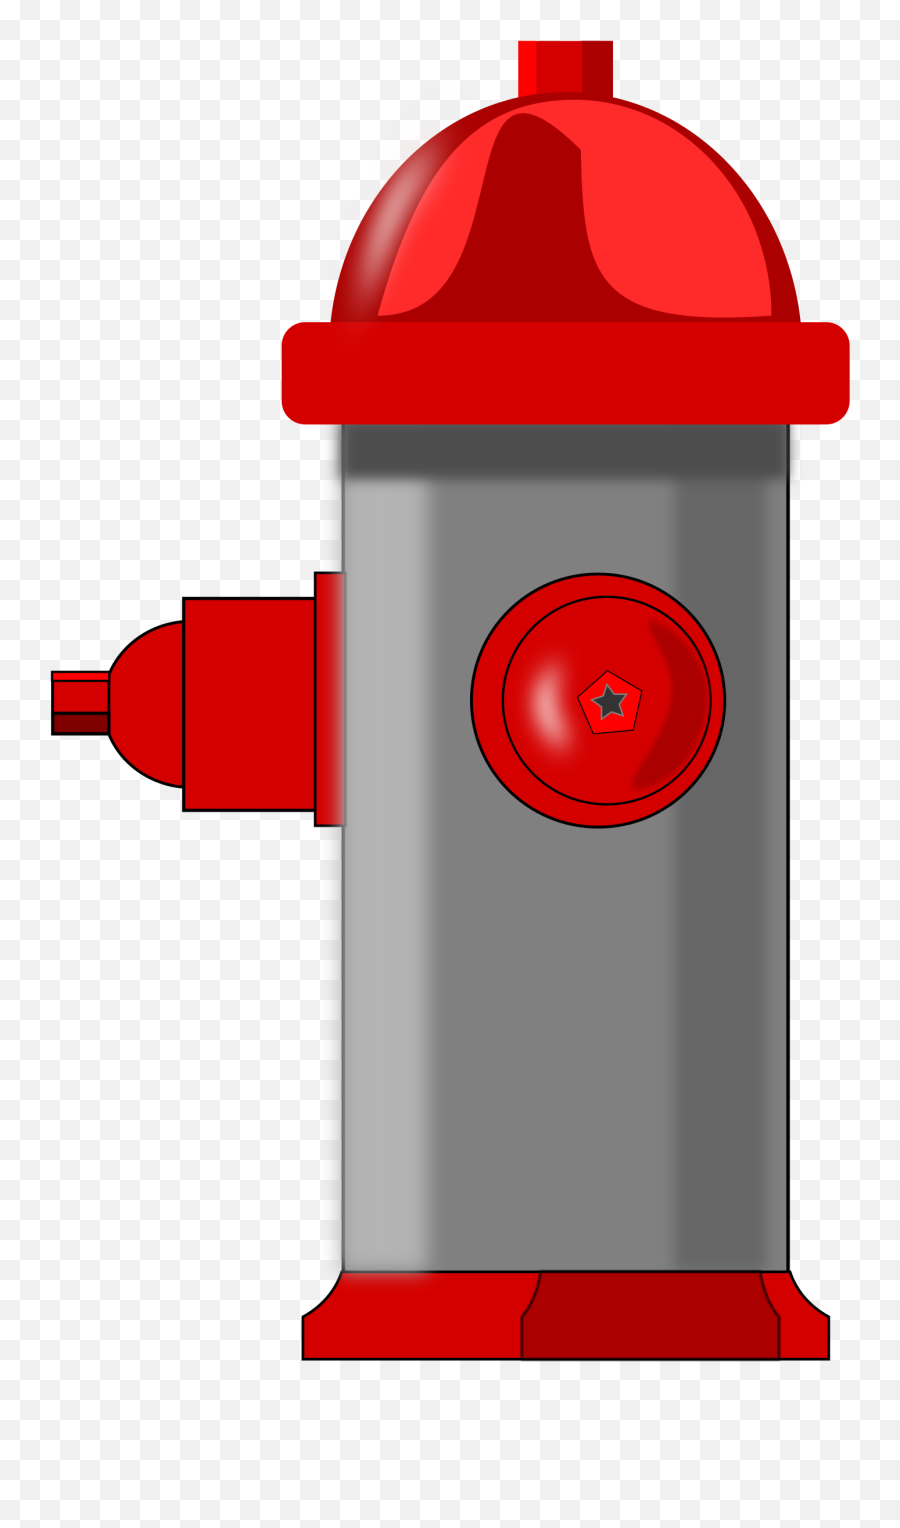 Fire Hydrant Vector Clipart Image - Hydrant Clipart Png Emoji,Thinking Emoji